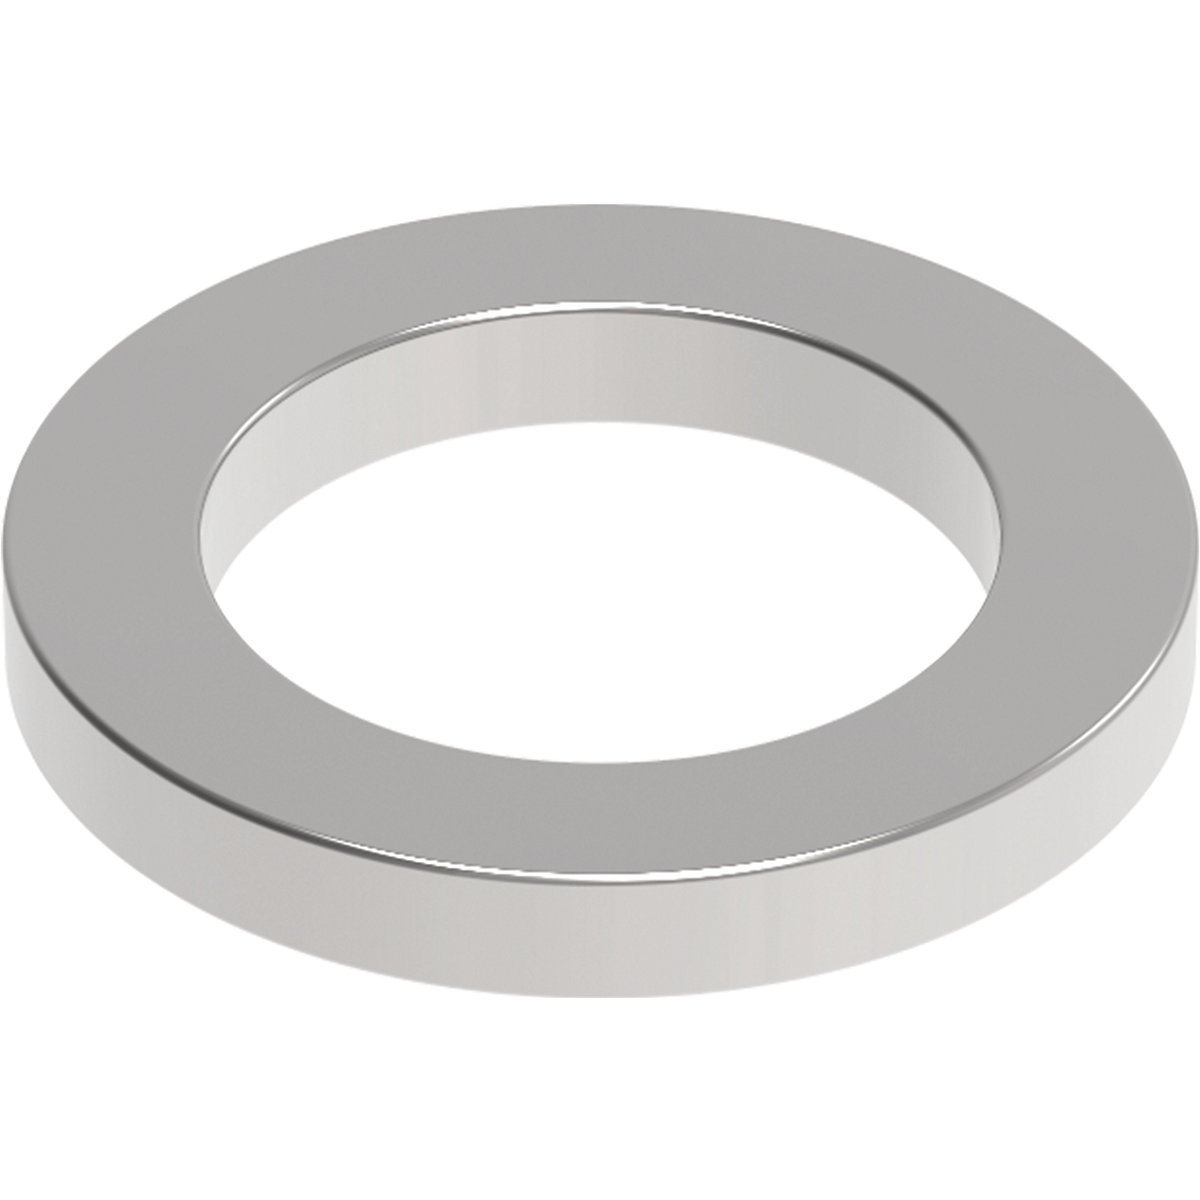 Ring magnet – MAUL